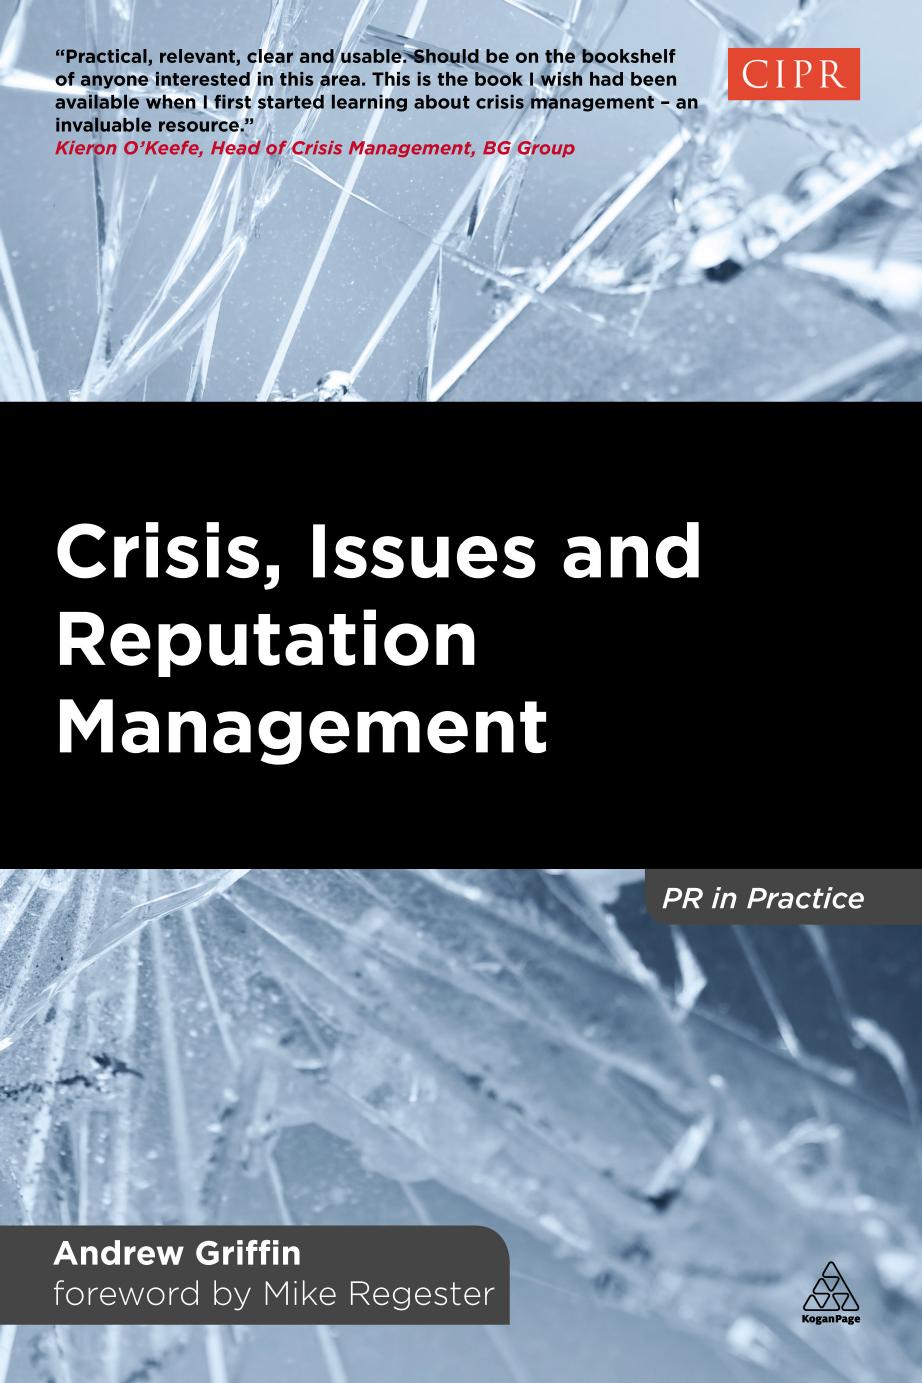 Crisis, Issues and Reputation Management.jpg